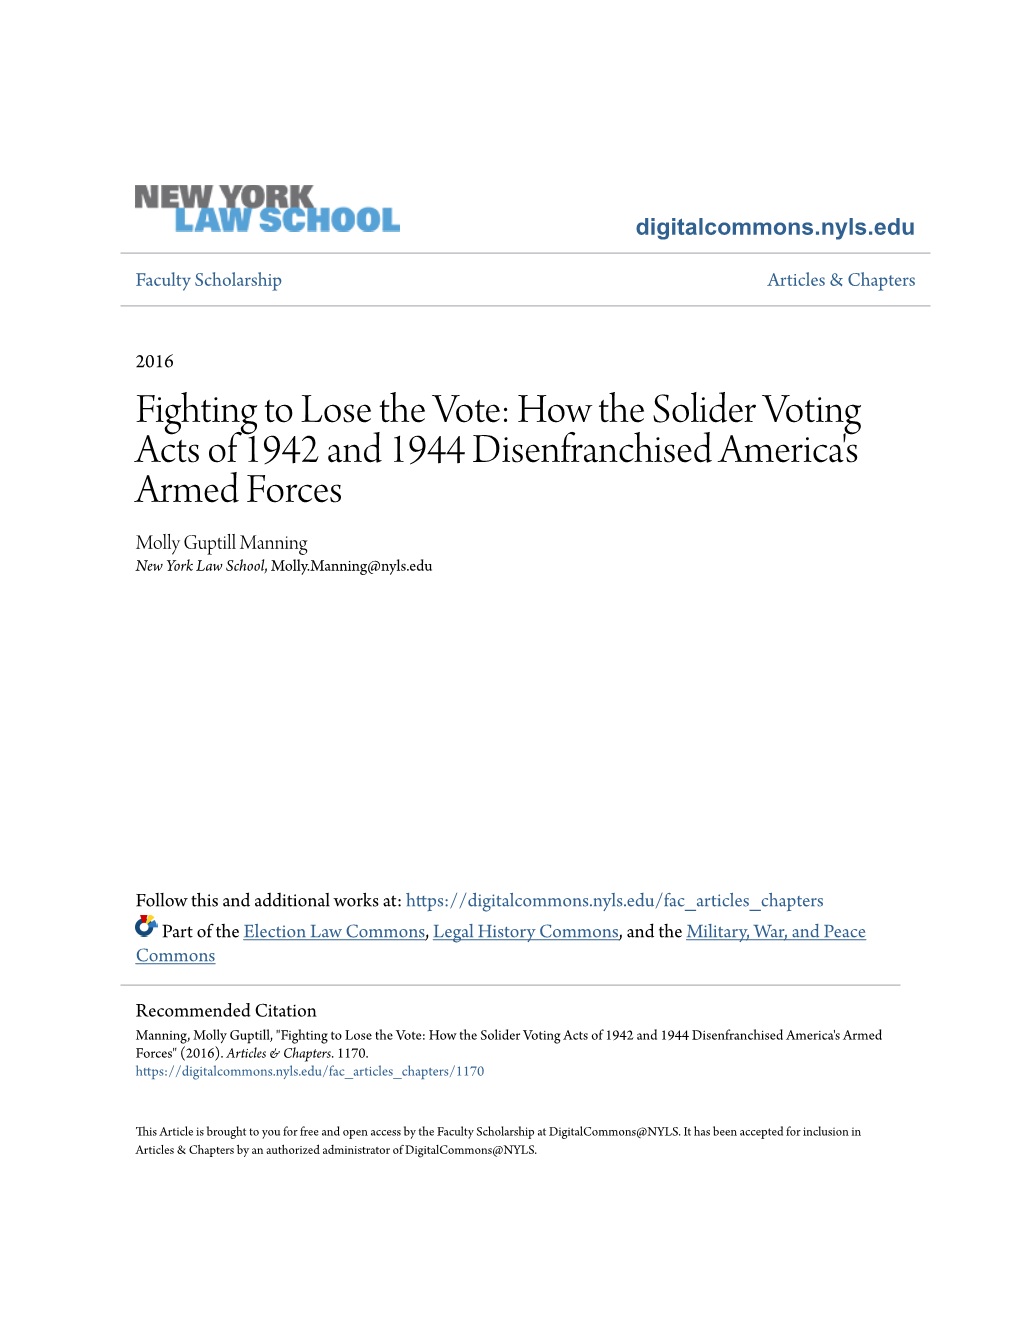 Fighting to Lose the Vote: How the Solider Voting Acts of 1942 And